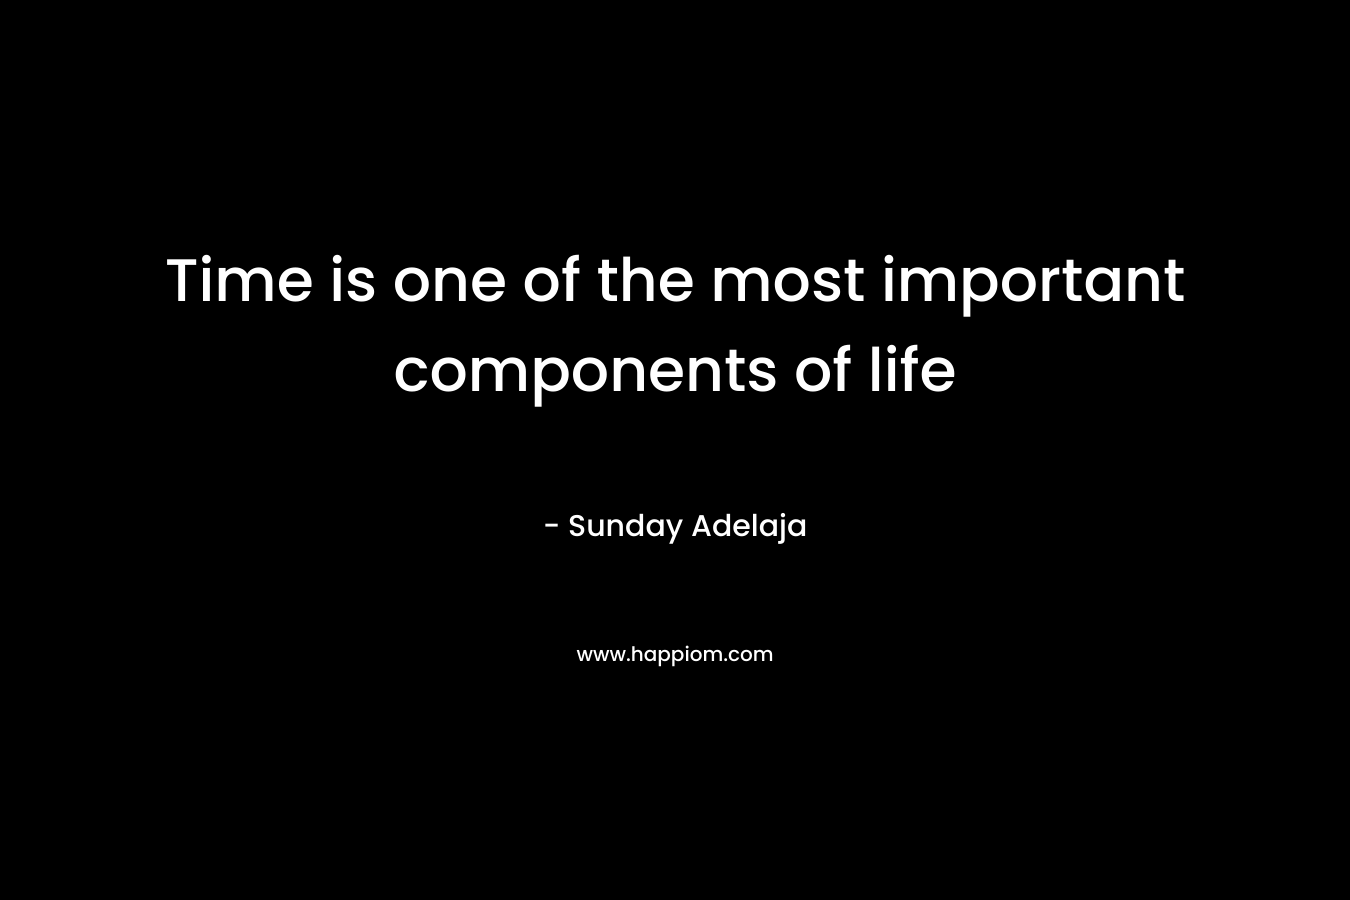 Time is one of the most important components of life